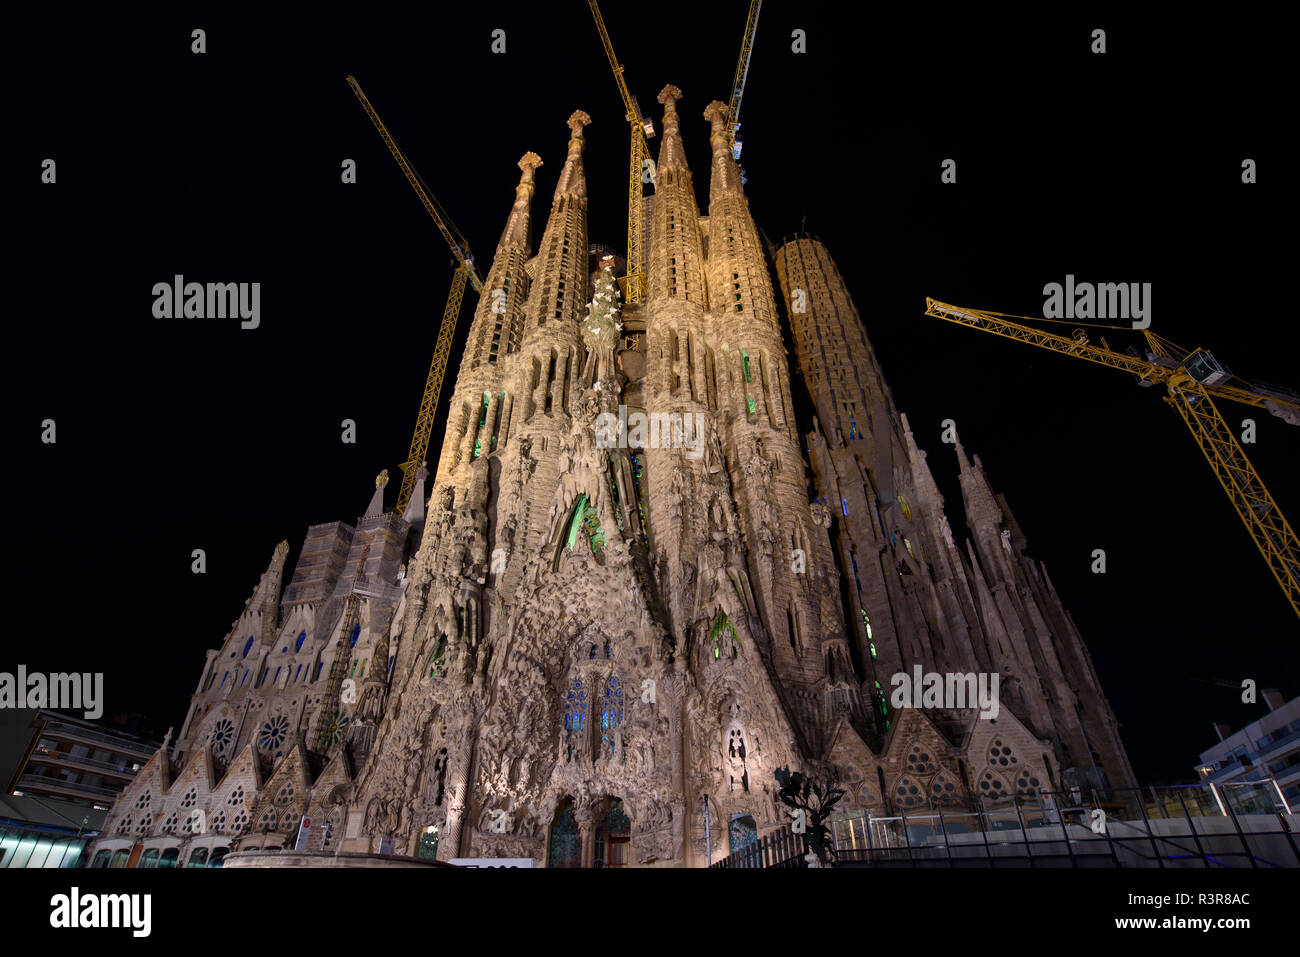 Night view of Nativity Façade of Sagrada Familia, the cathedral designed by Gaudi in Barcelona, Spain Stock Photo